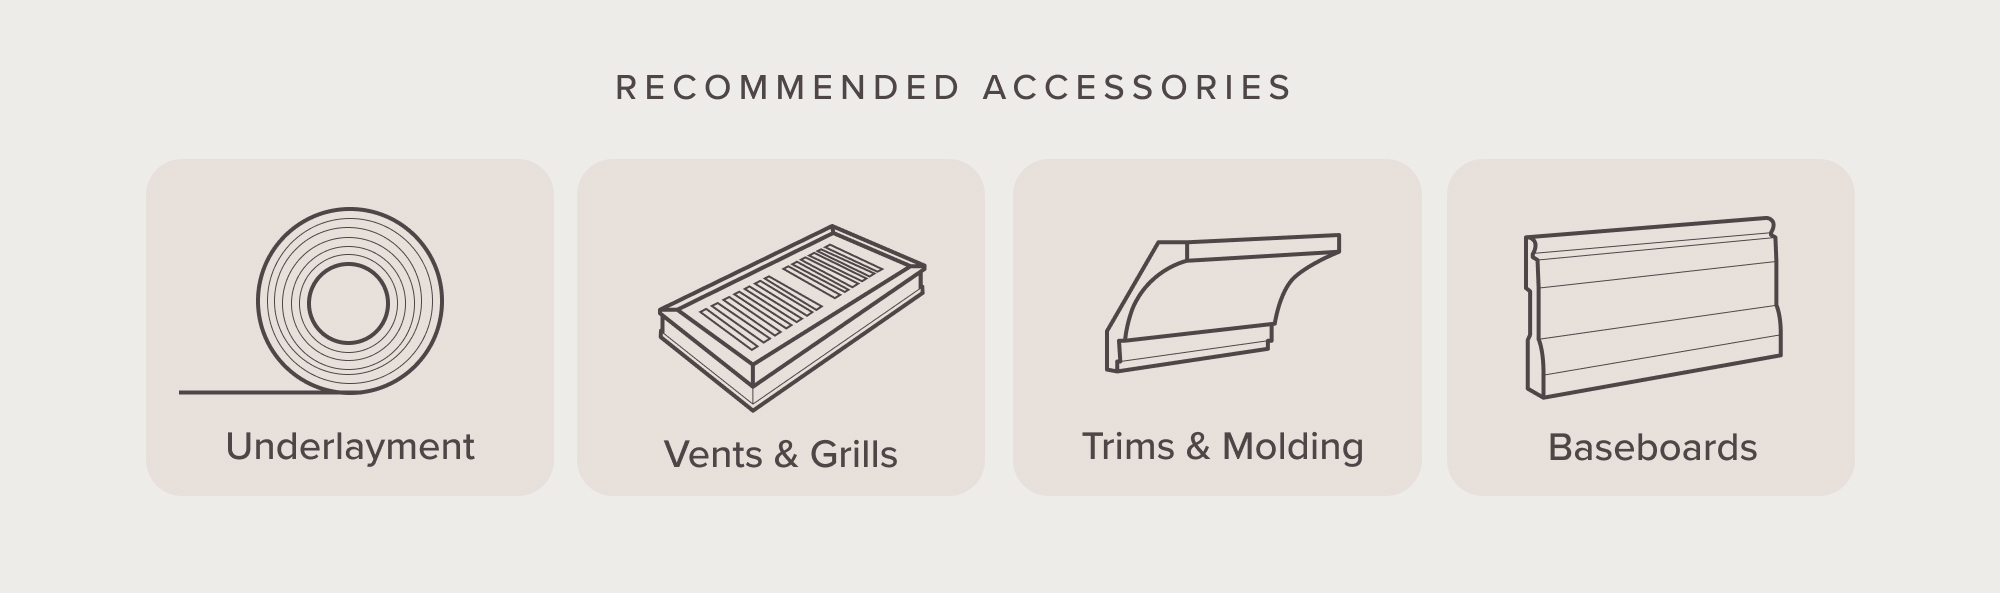 graphic showing accessories of flooring project